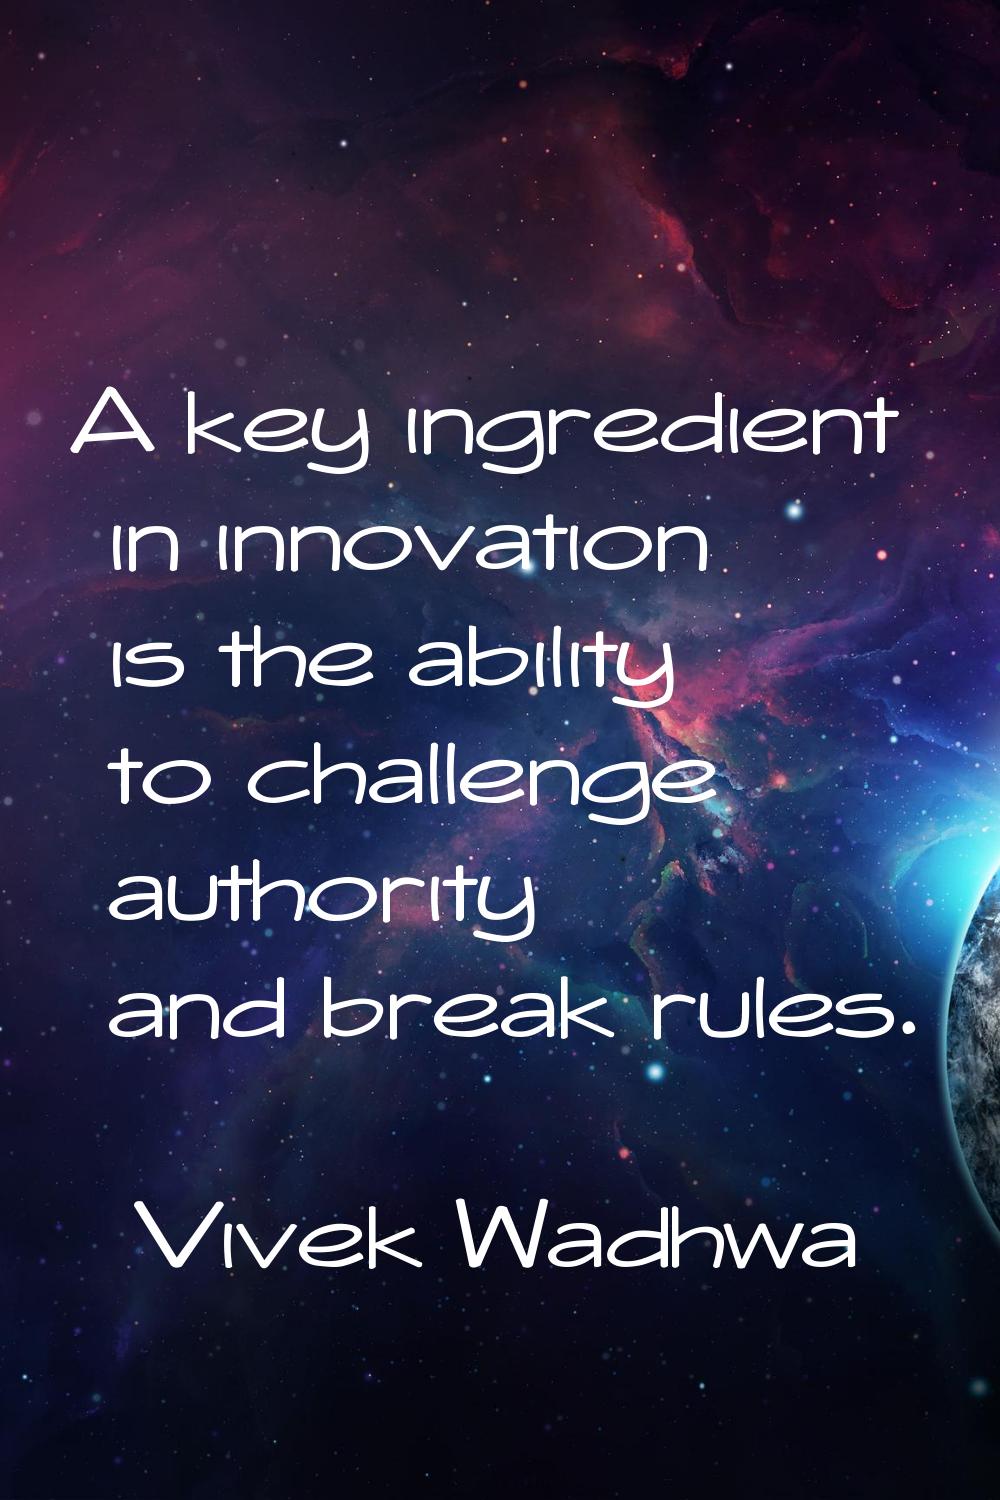 A key ingredient in innovation is the ability to challenge authority and break rules.